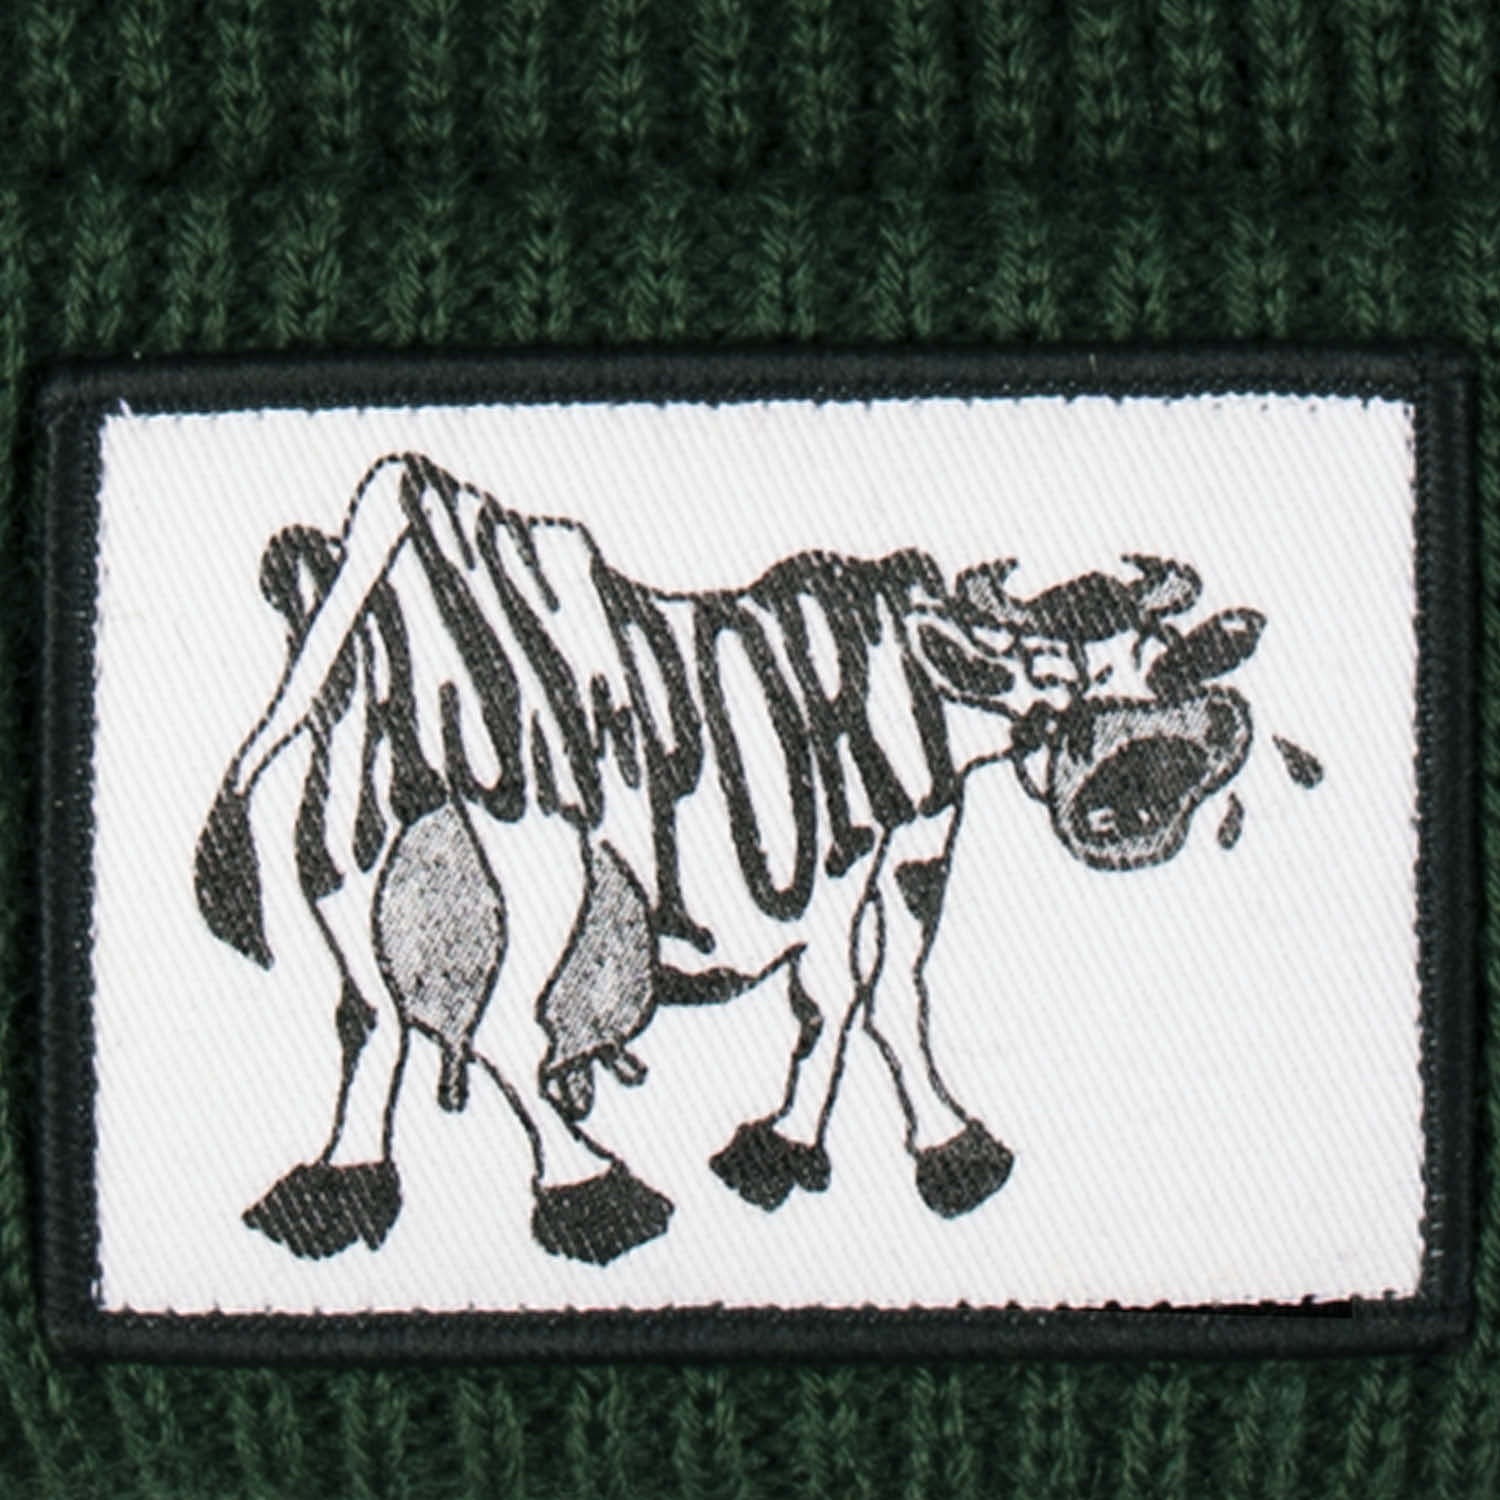 Crying Cow Beanie (Forest Green)